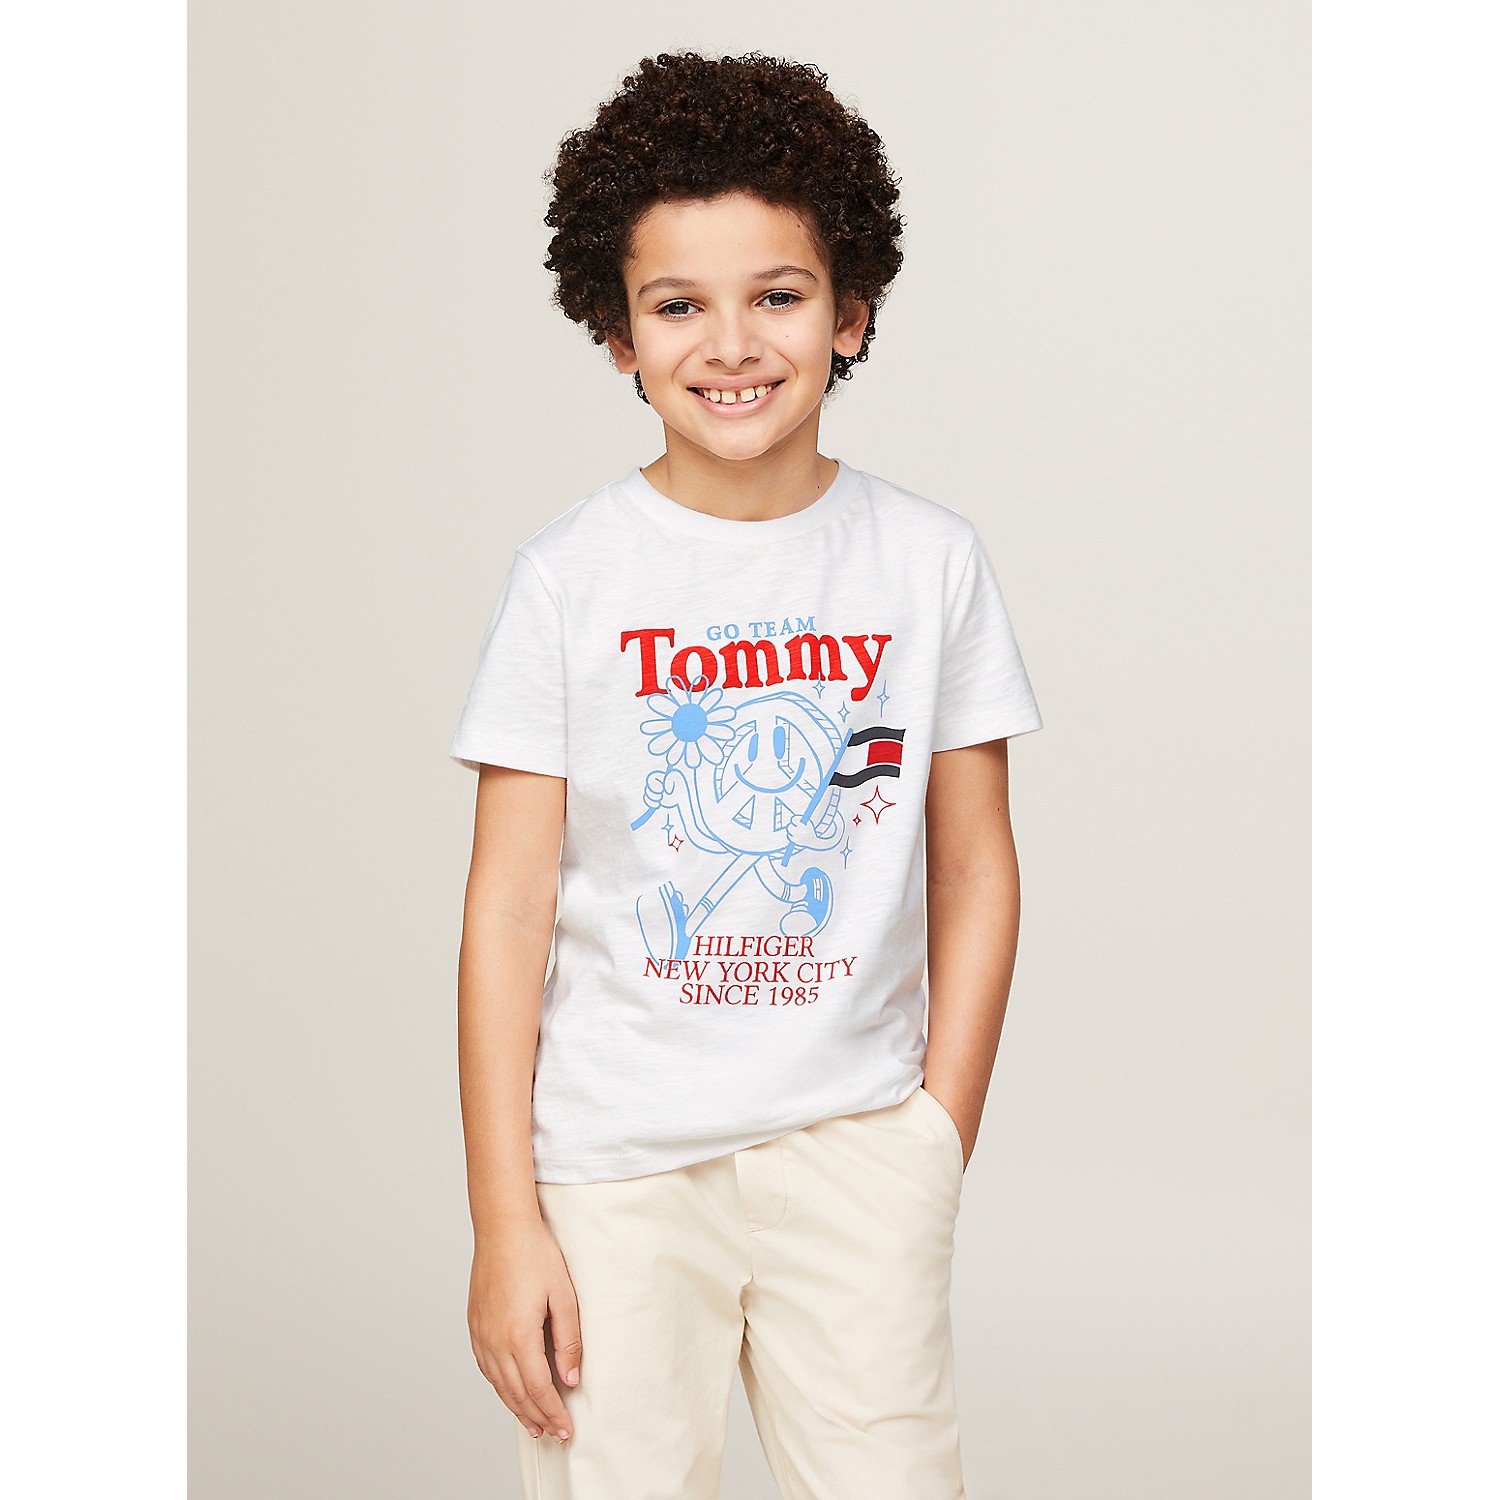 TOMMY HILFIGER Kids On-The-Go Graphic T-Shirt